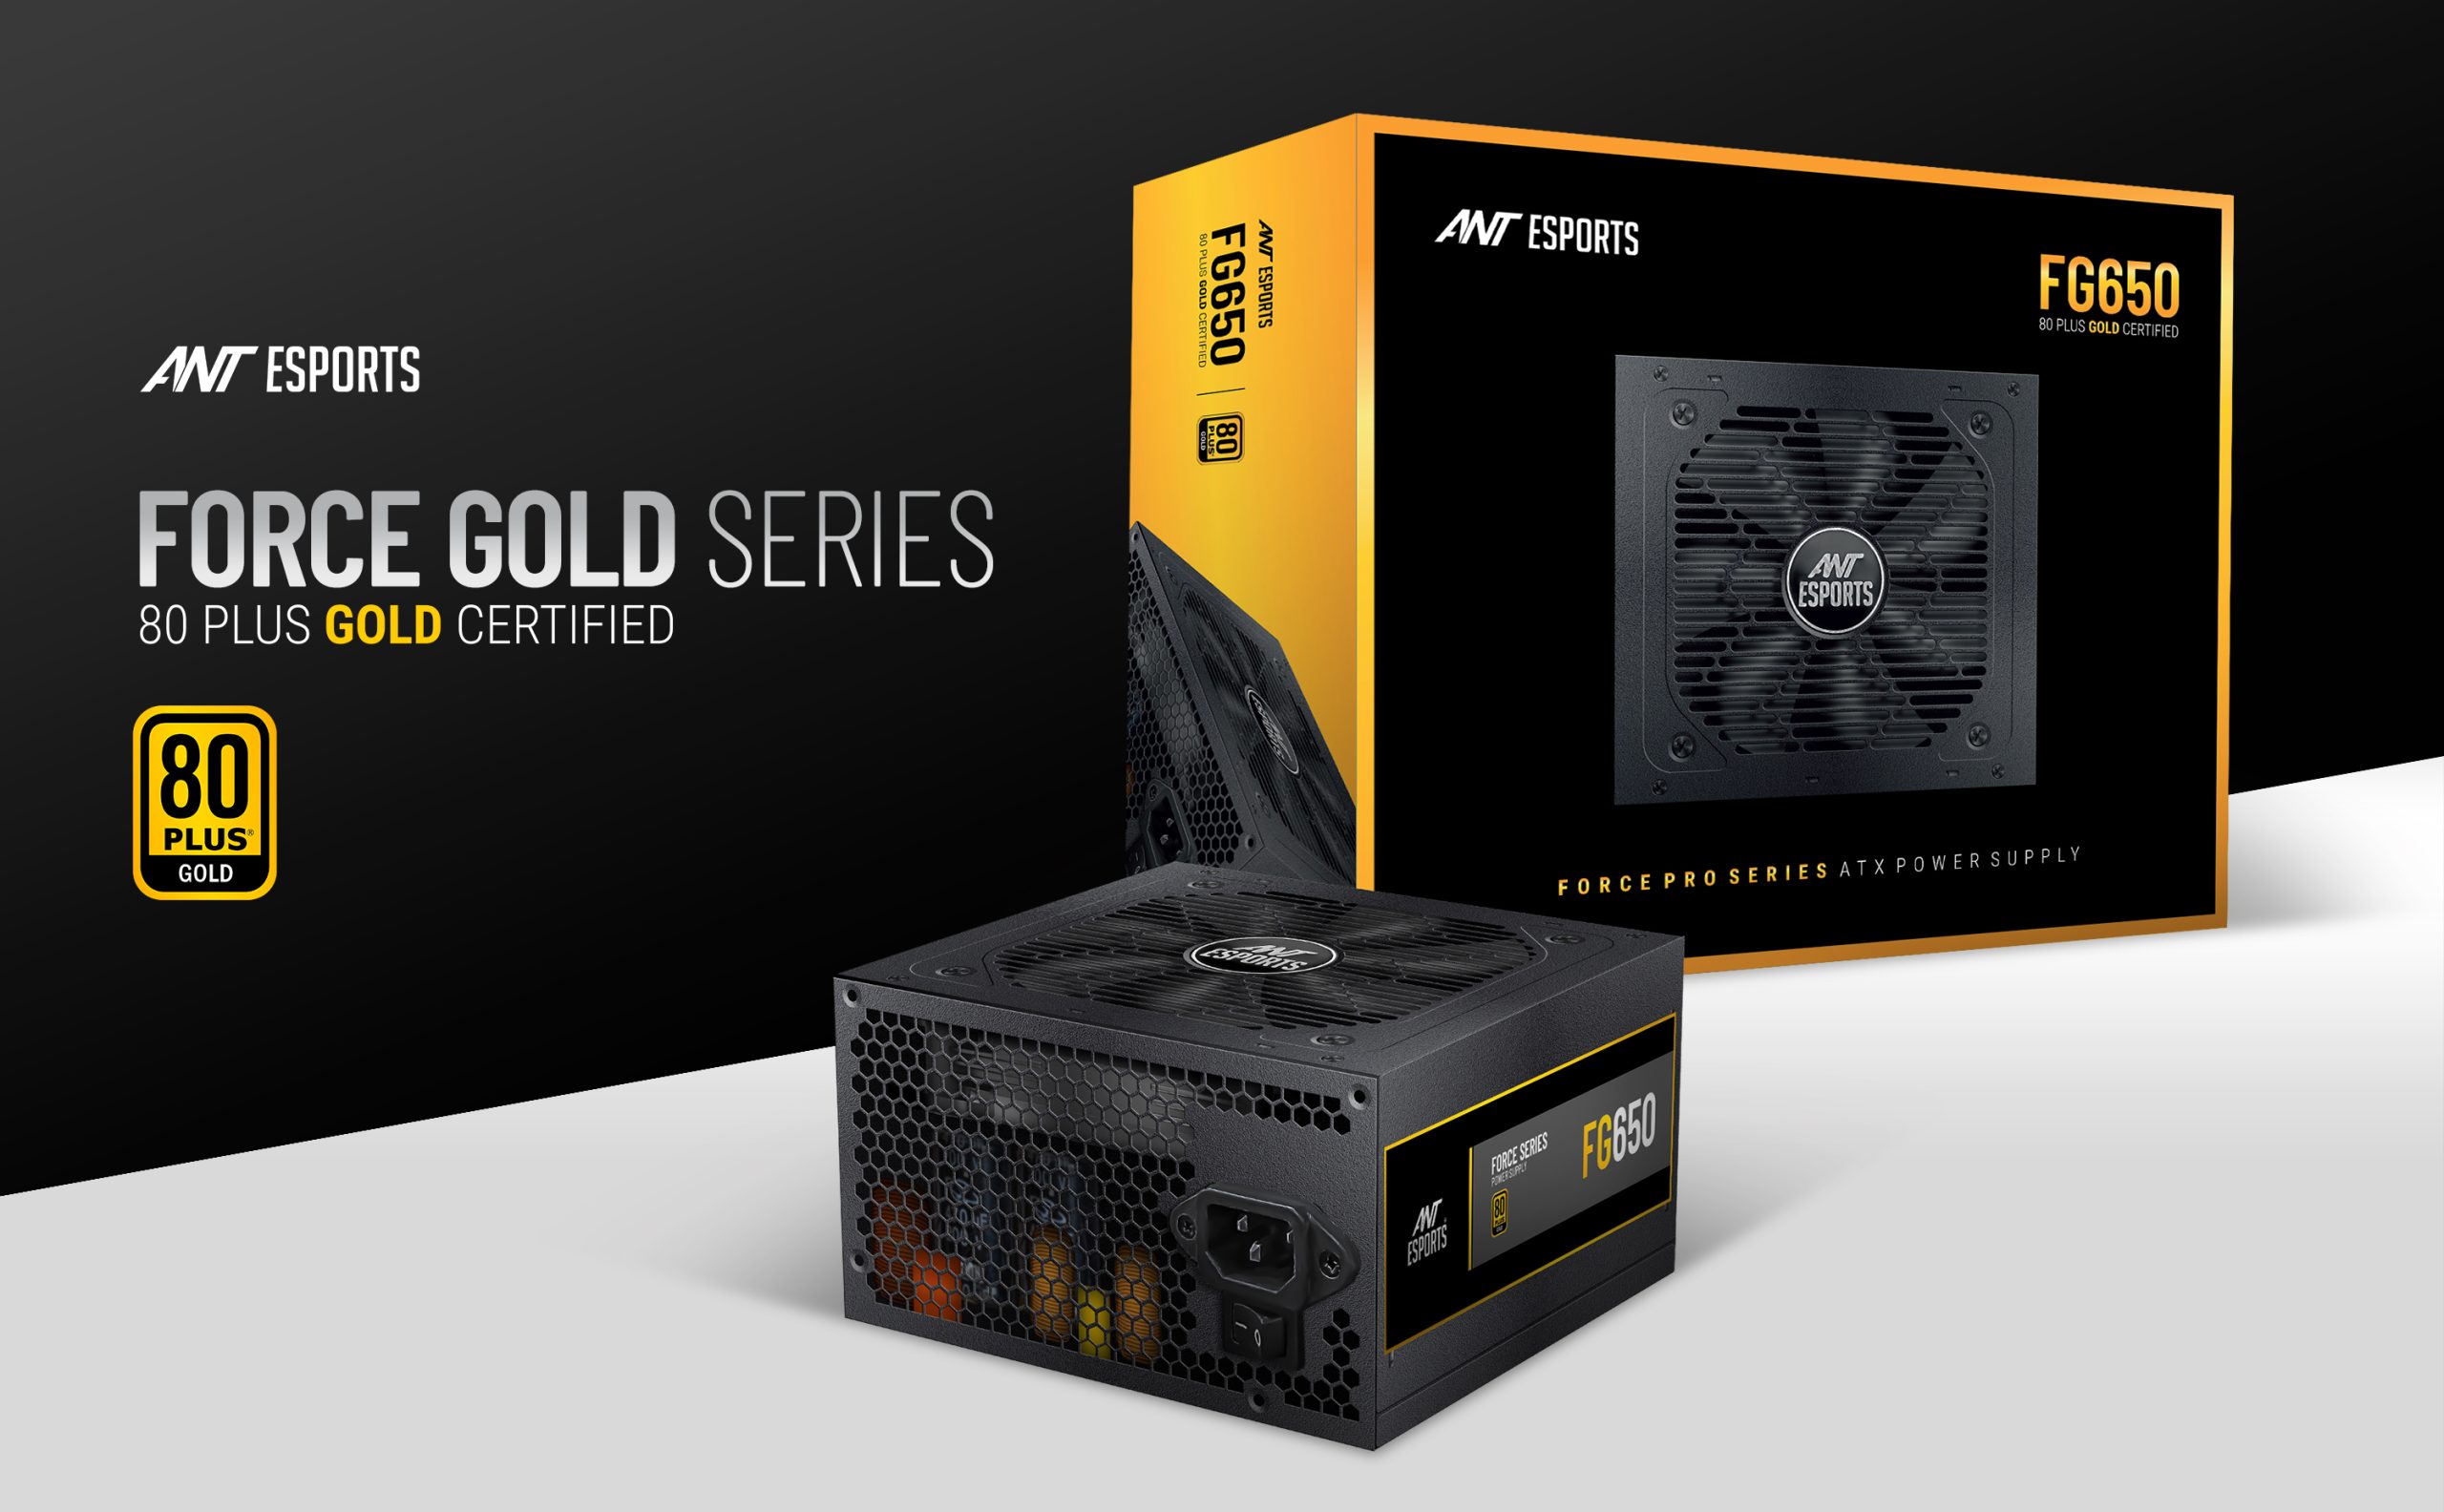 ANT Escports 8- Plus Gold Certified Force Gold Series Power Supply